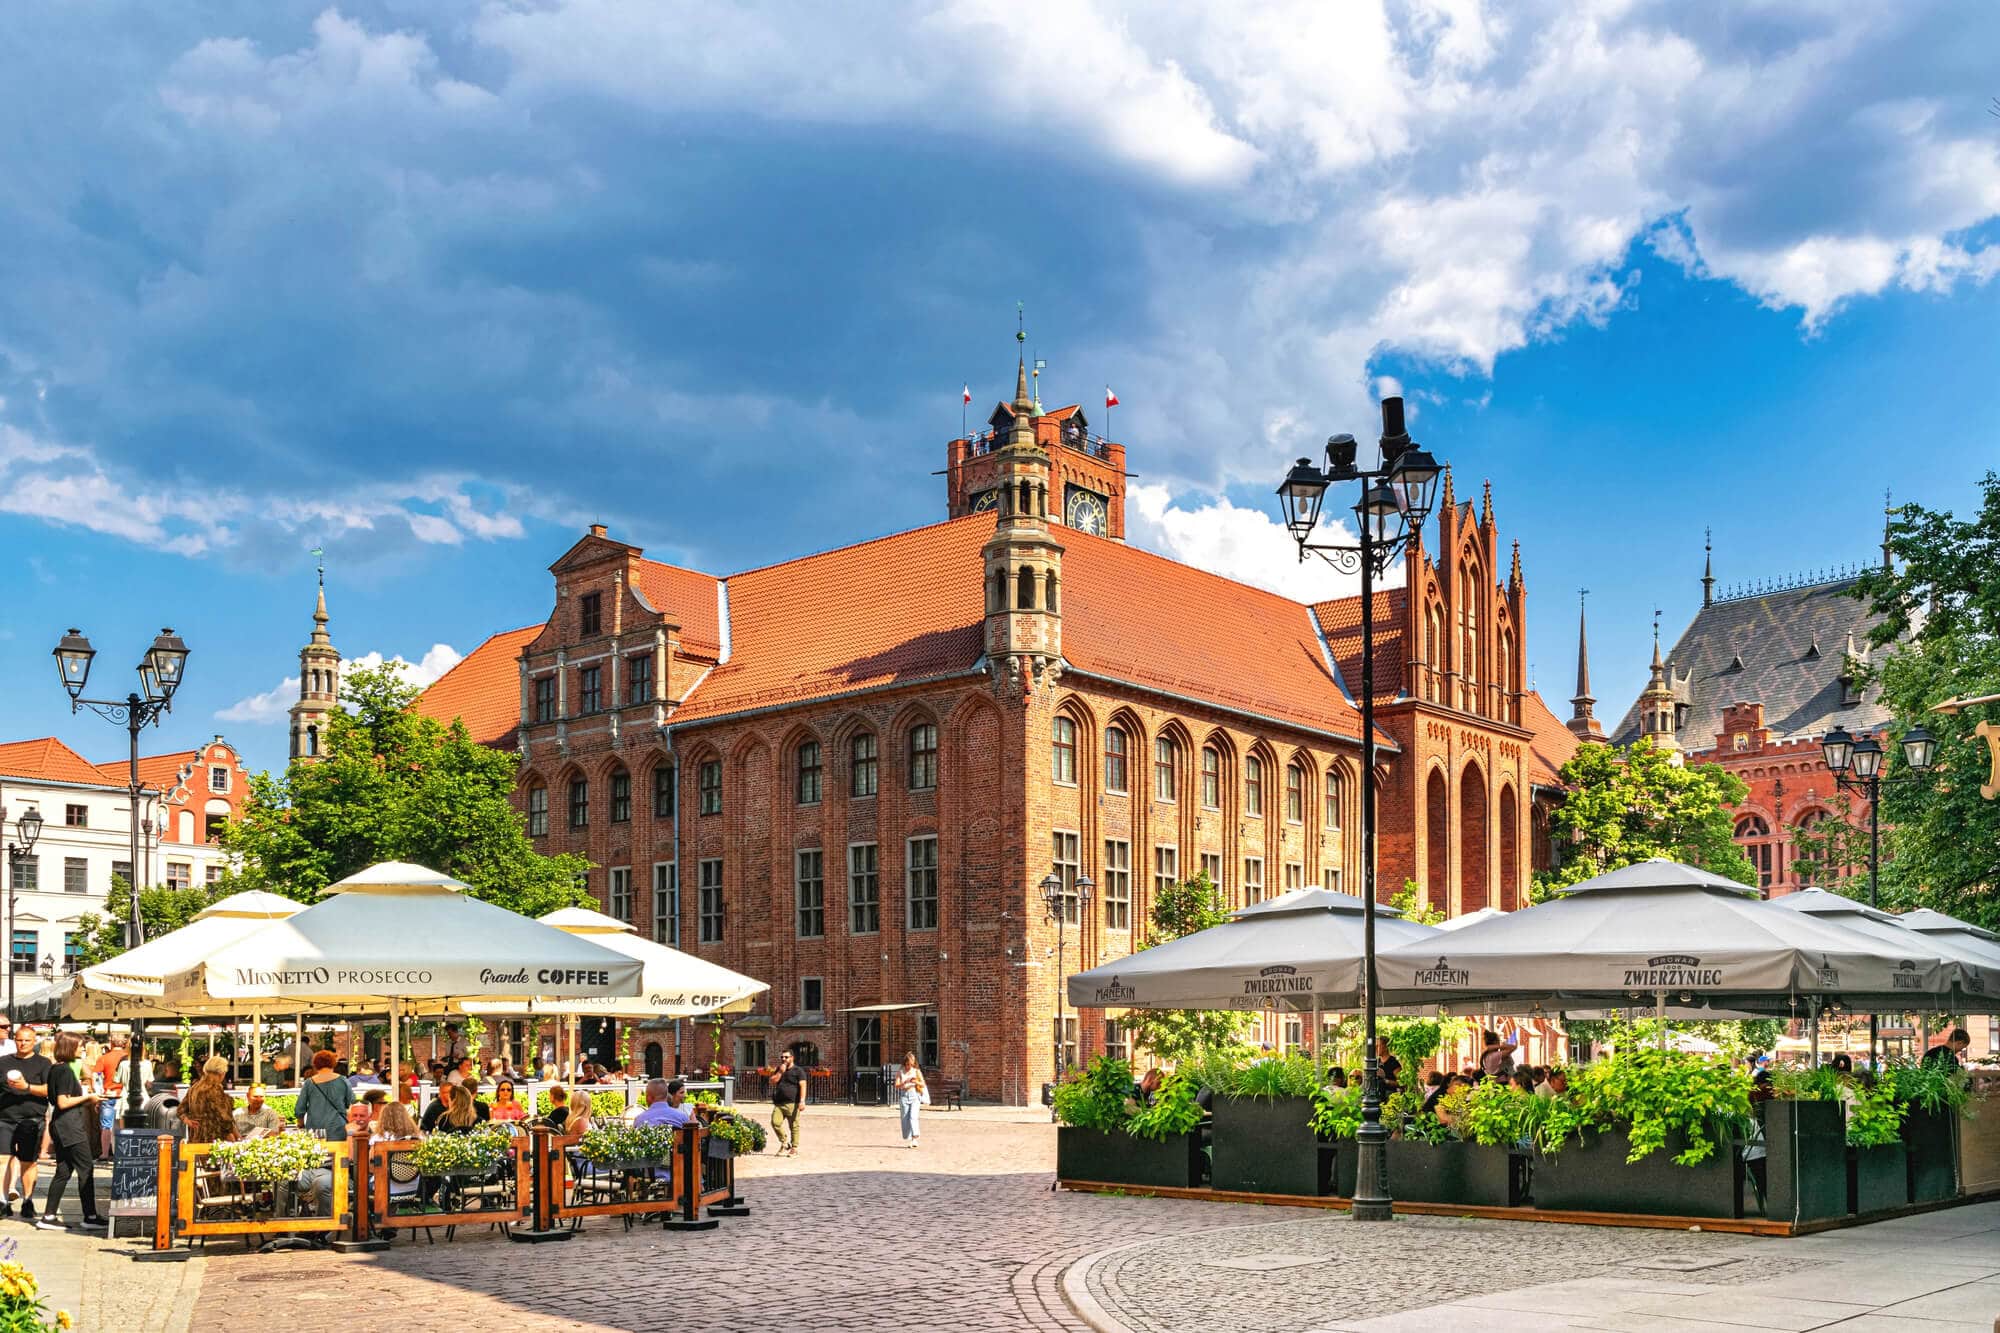 The city center in Torun, one of the most underrated cities in Poland and the perfect day trip from Gdansk.